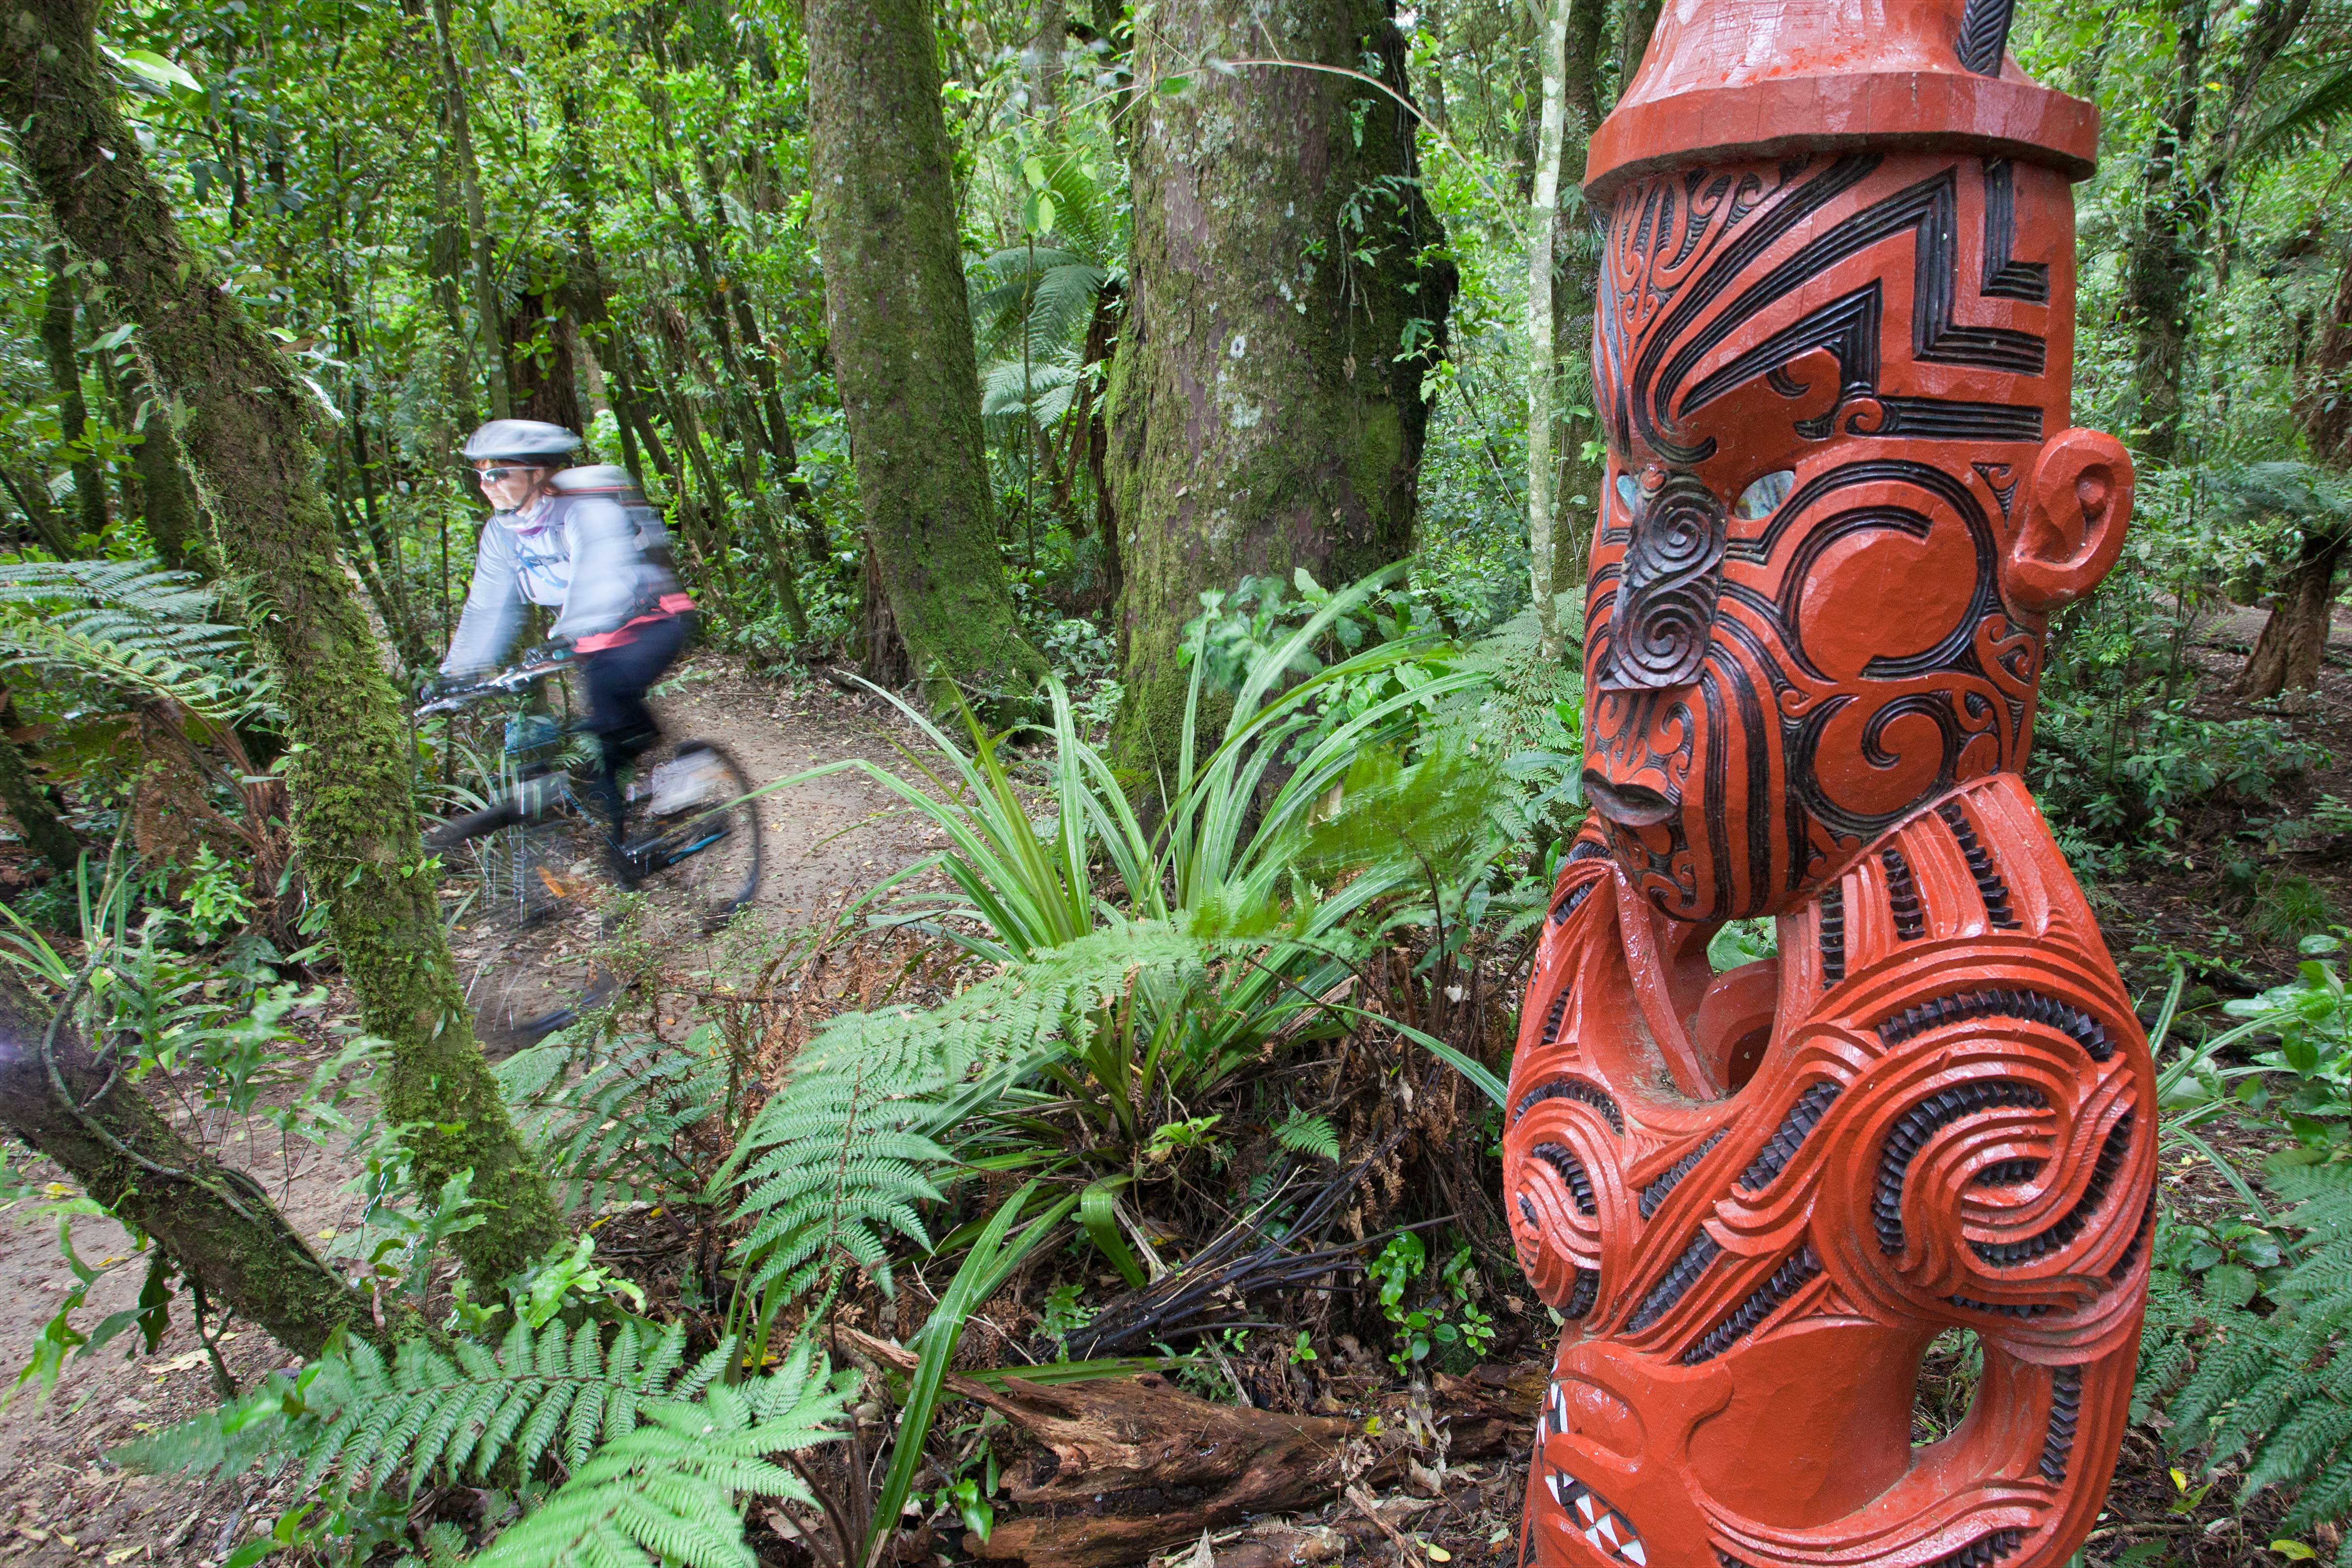 Person riding a bicycle through the forest with a large red Māori carving in the foreground.